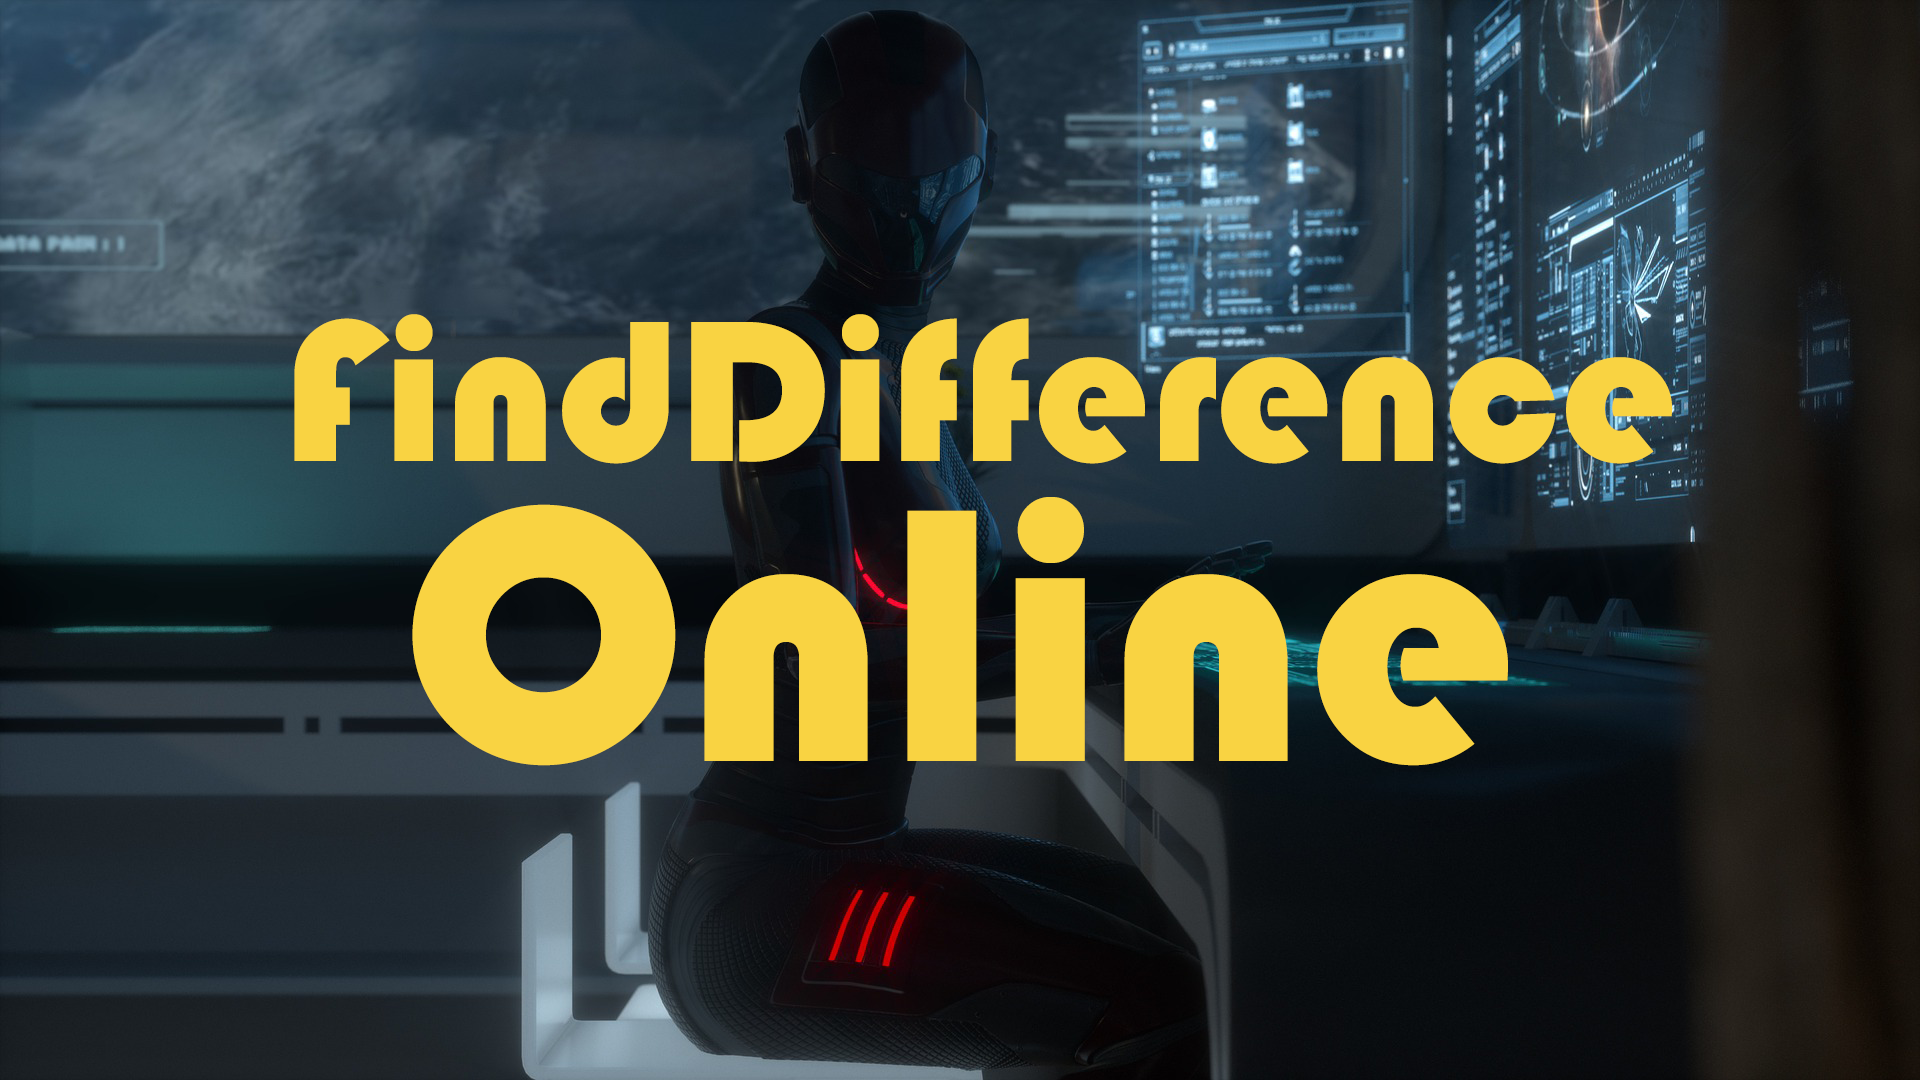 FindDifferenceOnline游戏截图